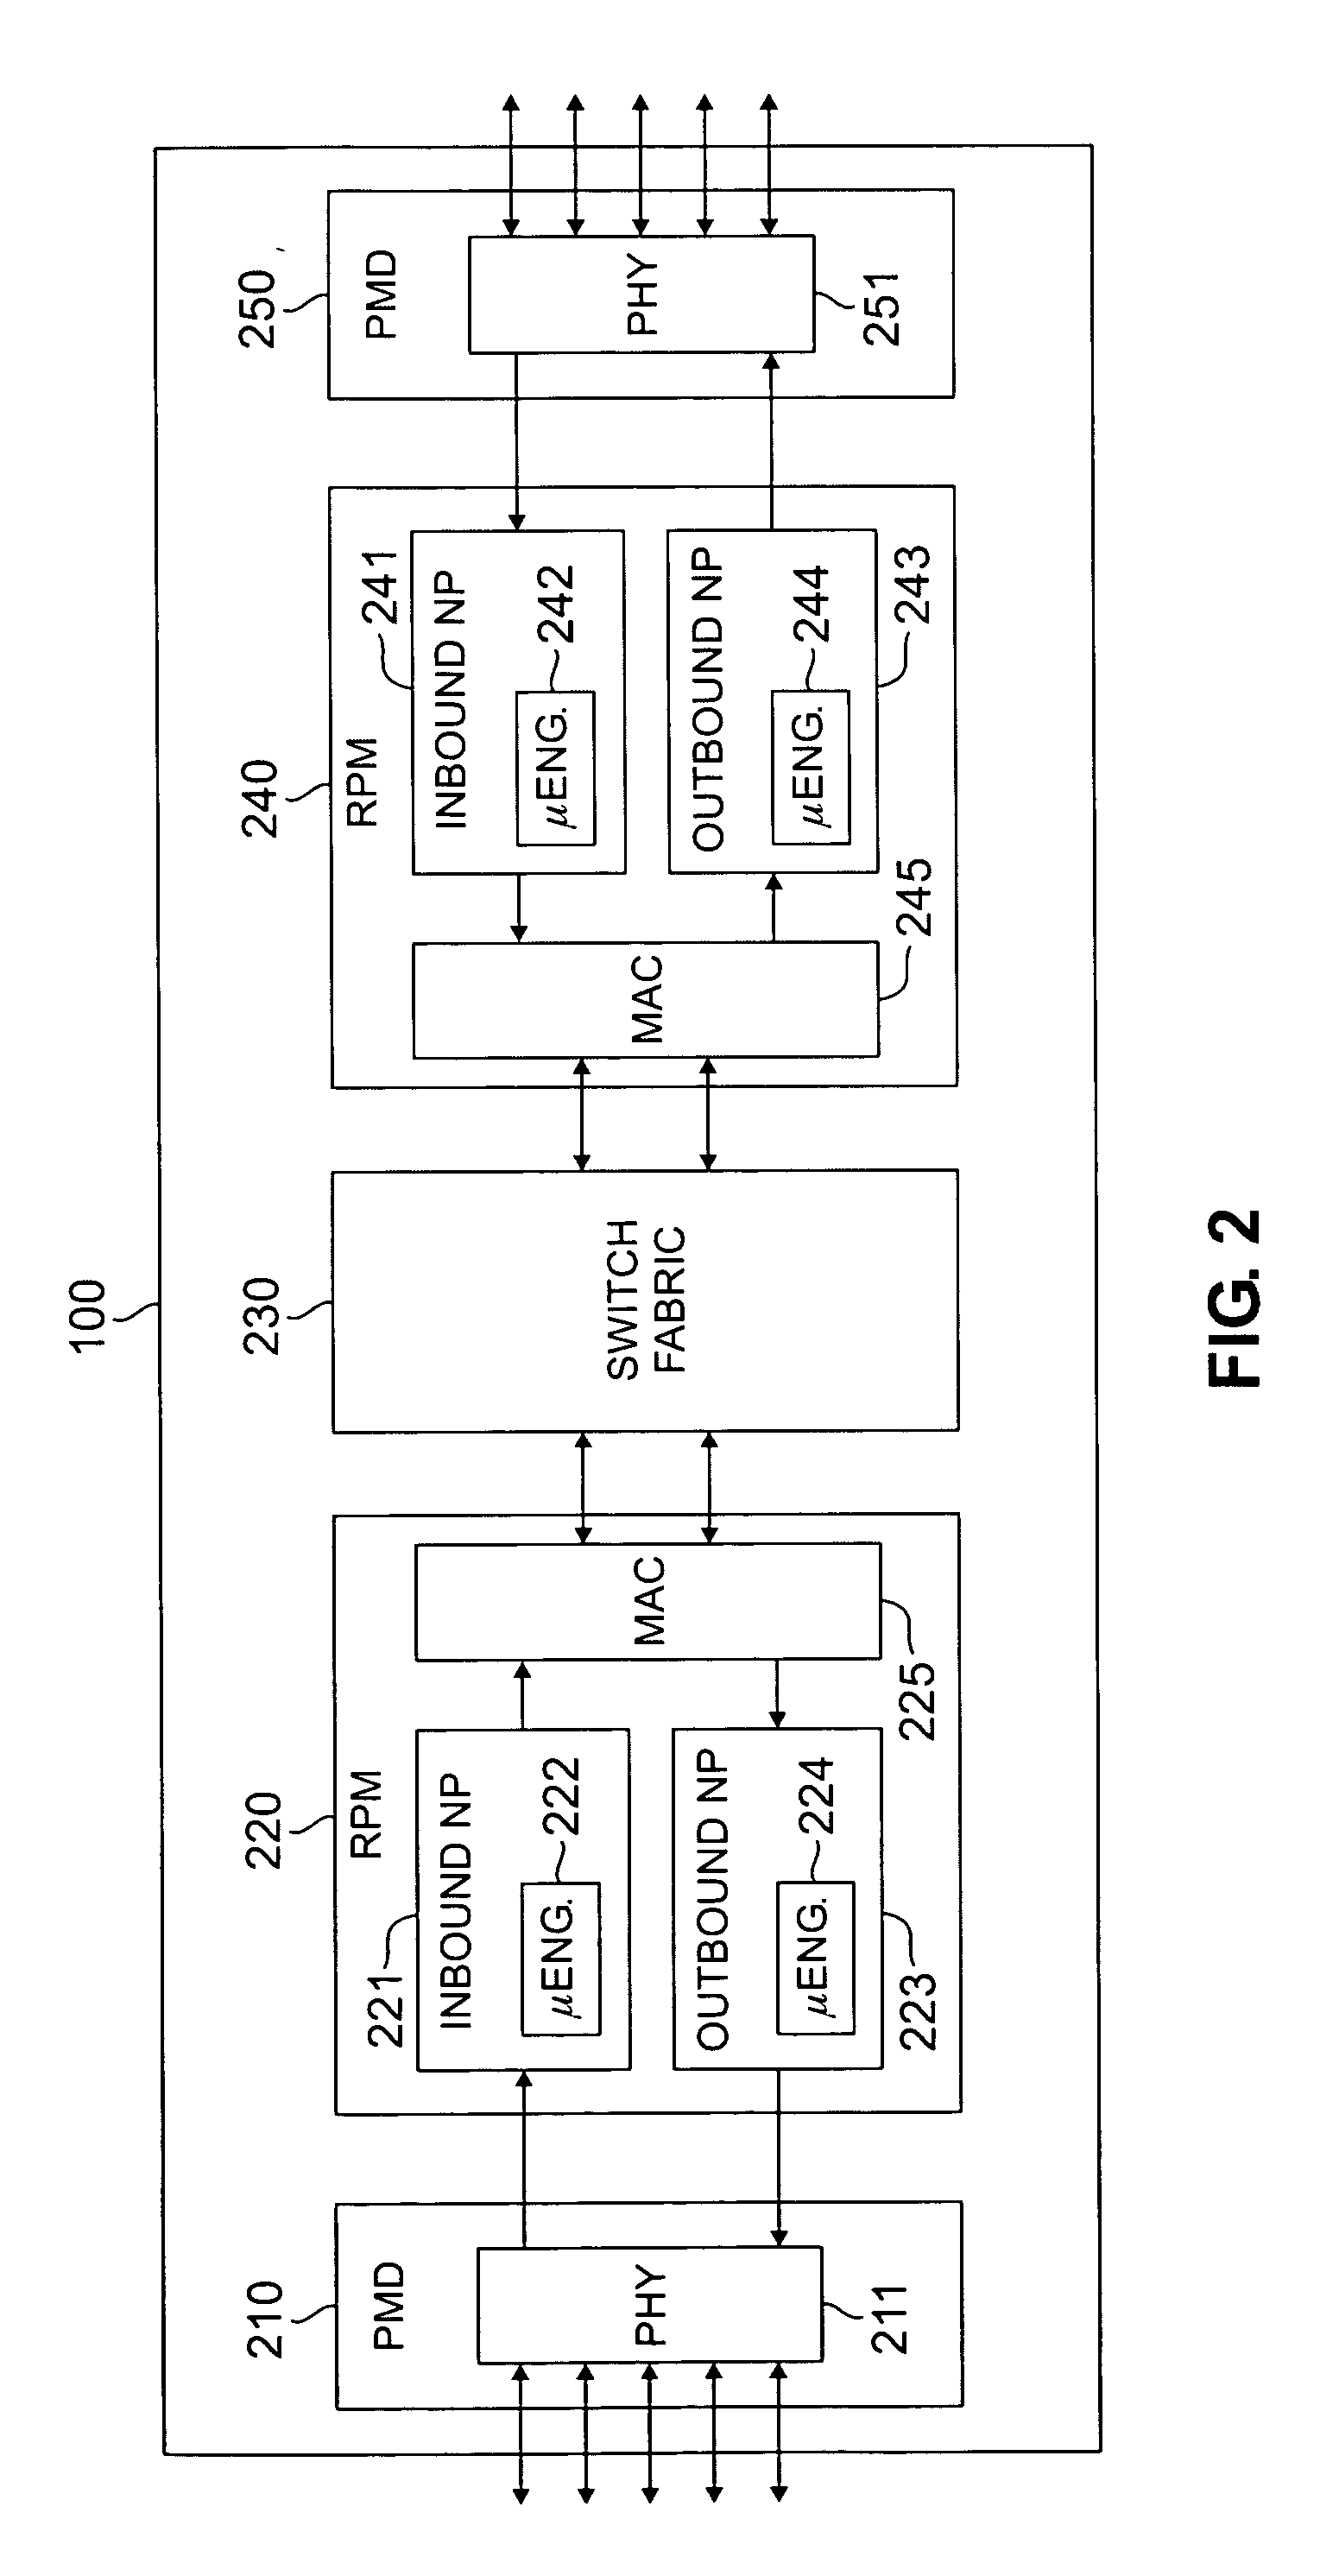 Apparatus and method for sharing variables and resources in a multiprocessor routing node